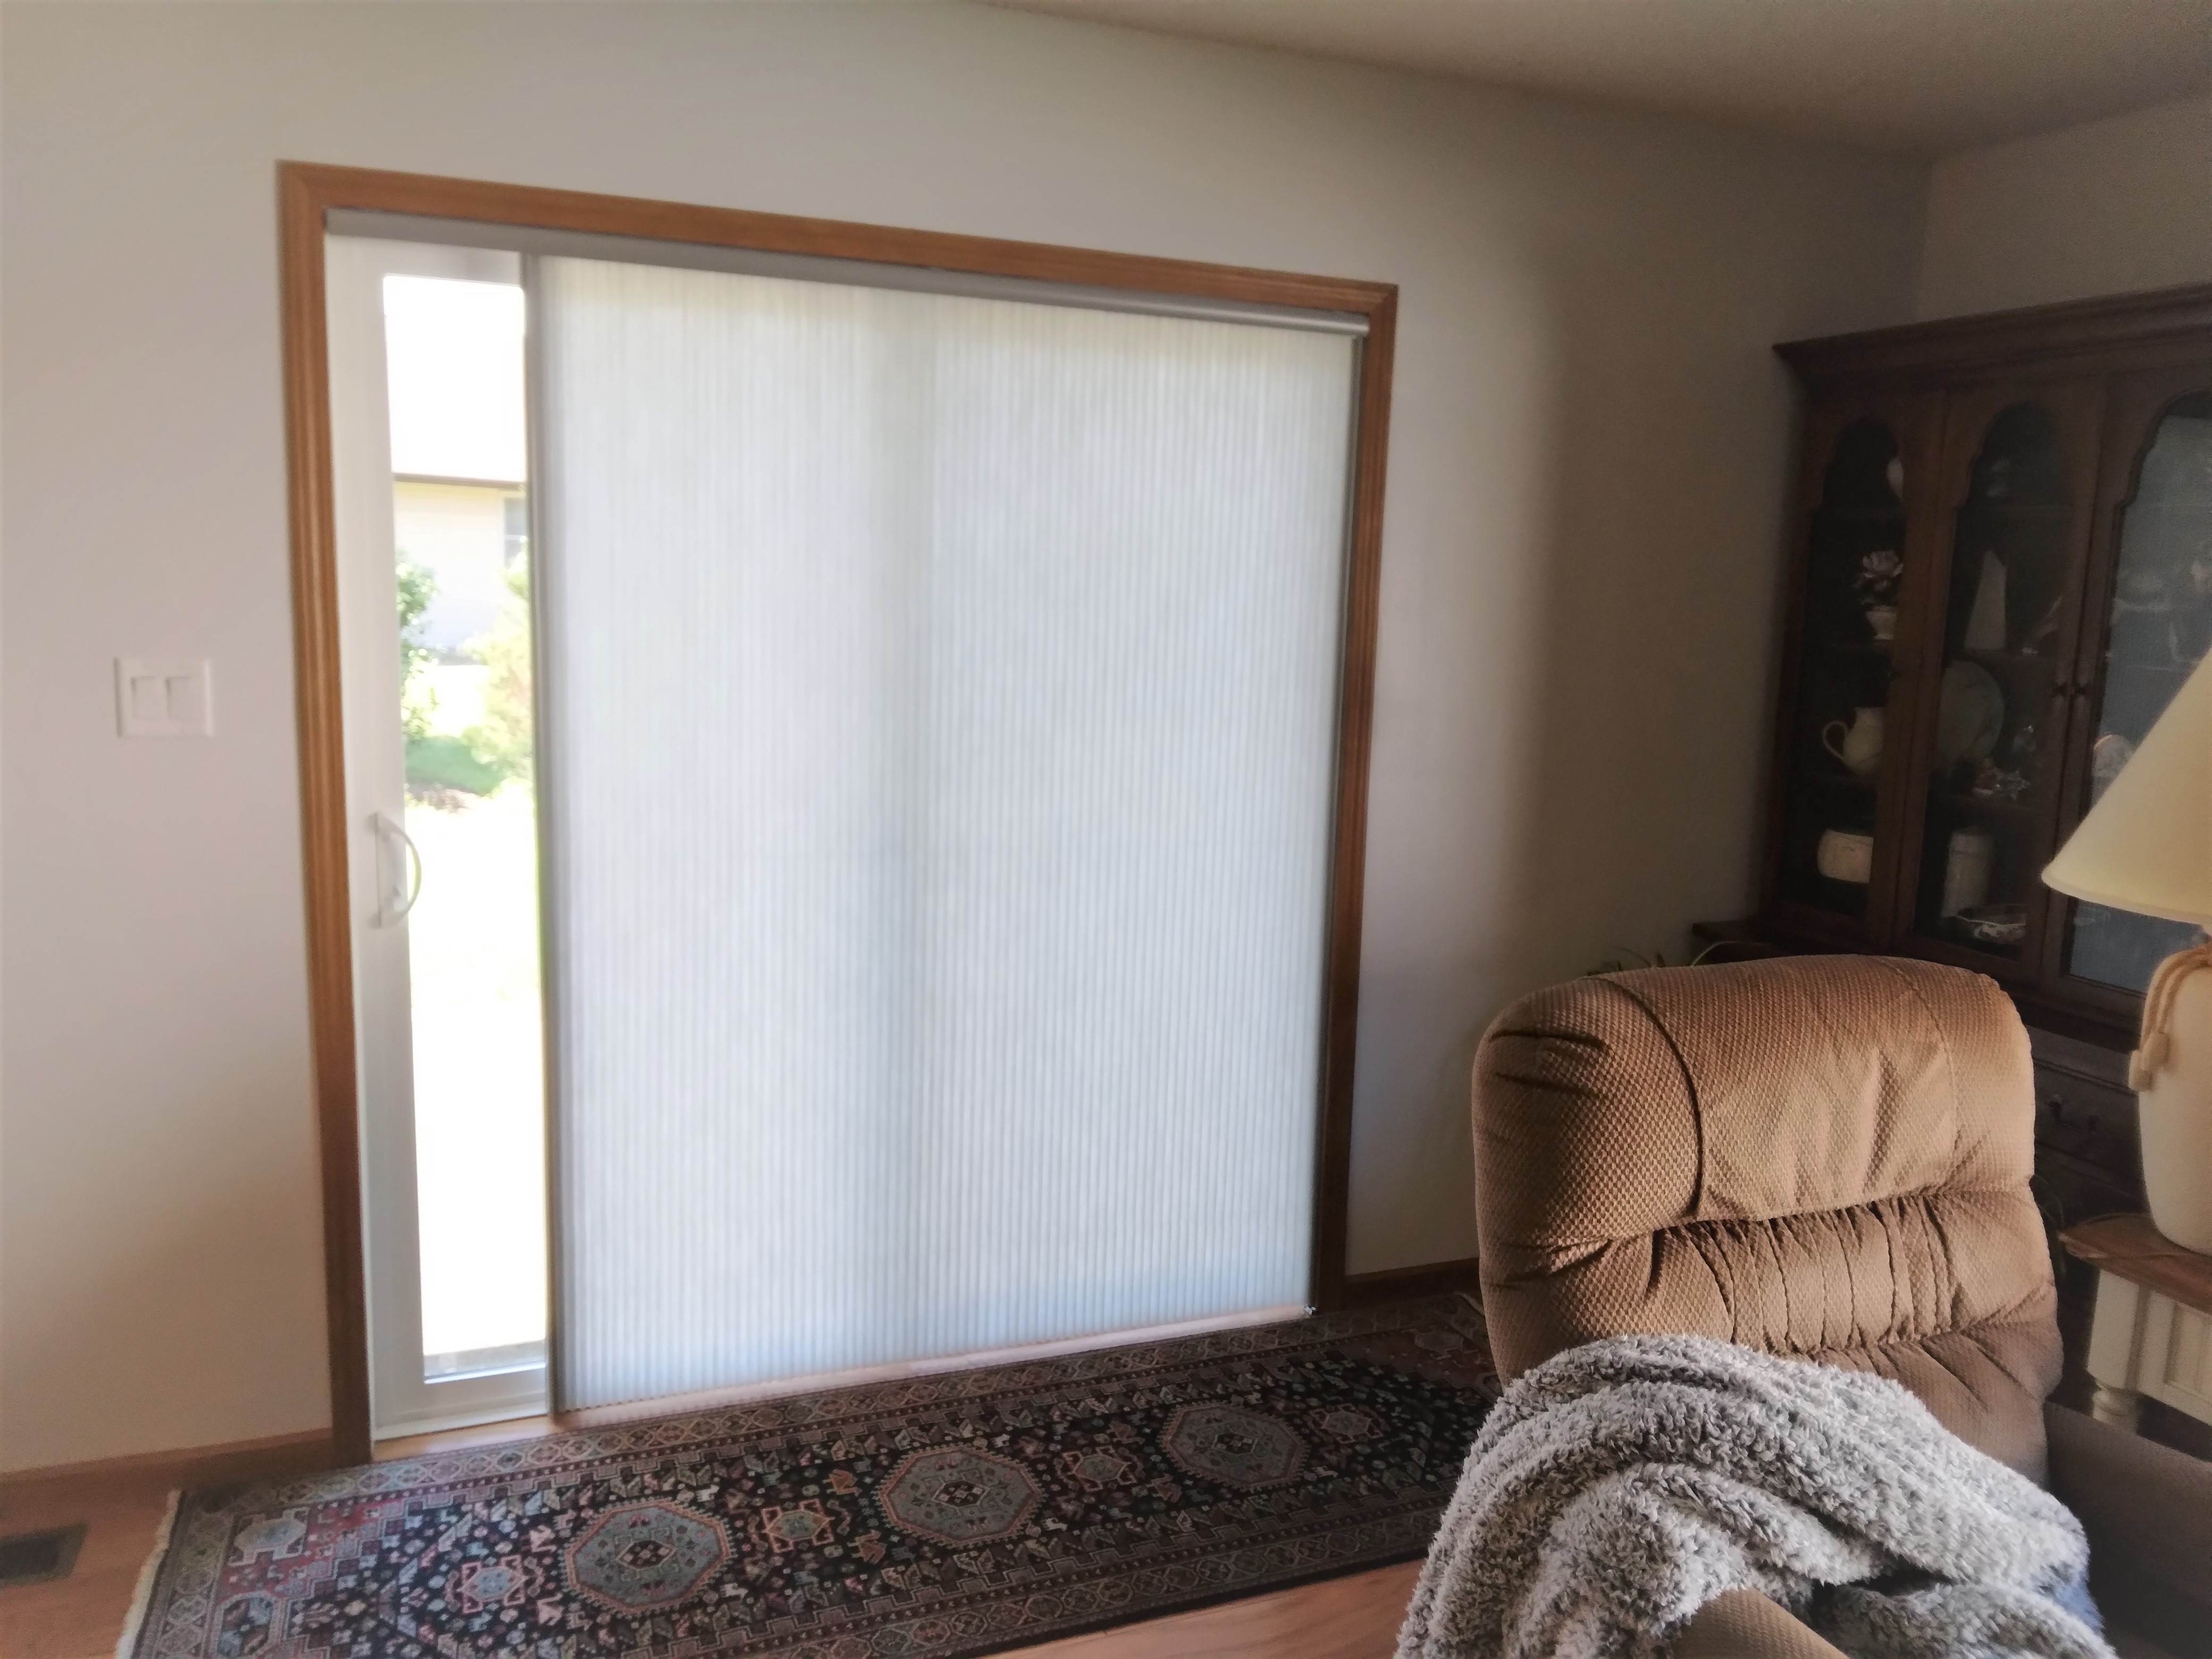 Vertical cellular window shades are a good option to cover doors, especially when matching existing cellular shades in the windows.  BudgetBlinds  Shades  Blinds  CellularShades  HoneycombShades  SpringfieldIllinois